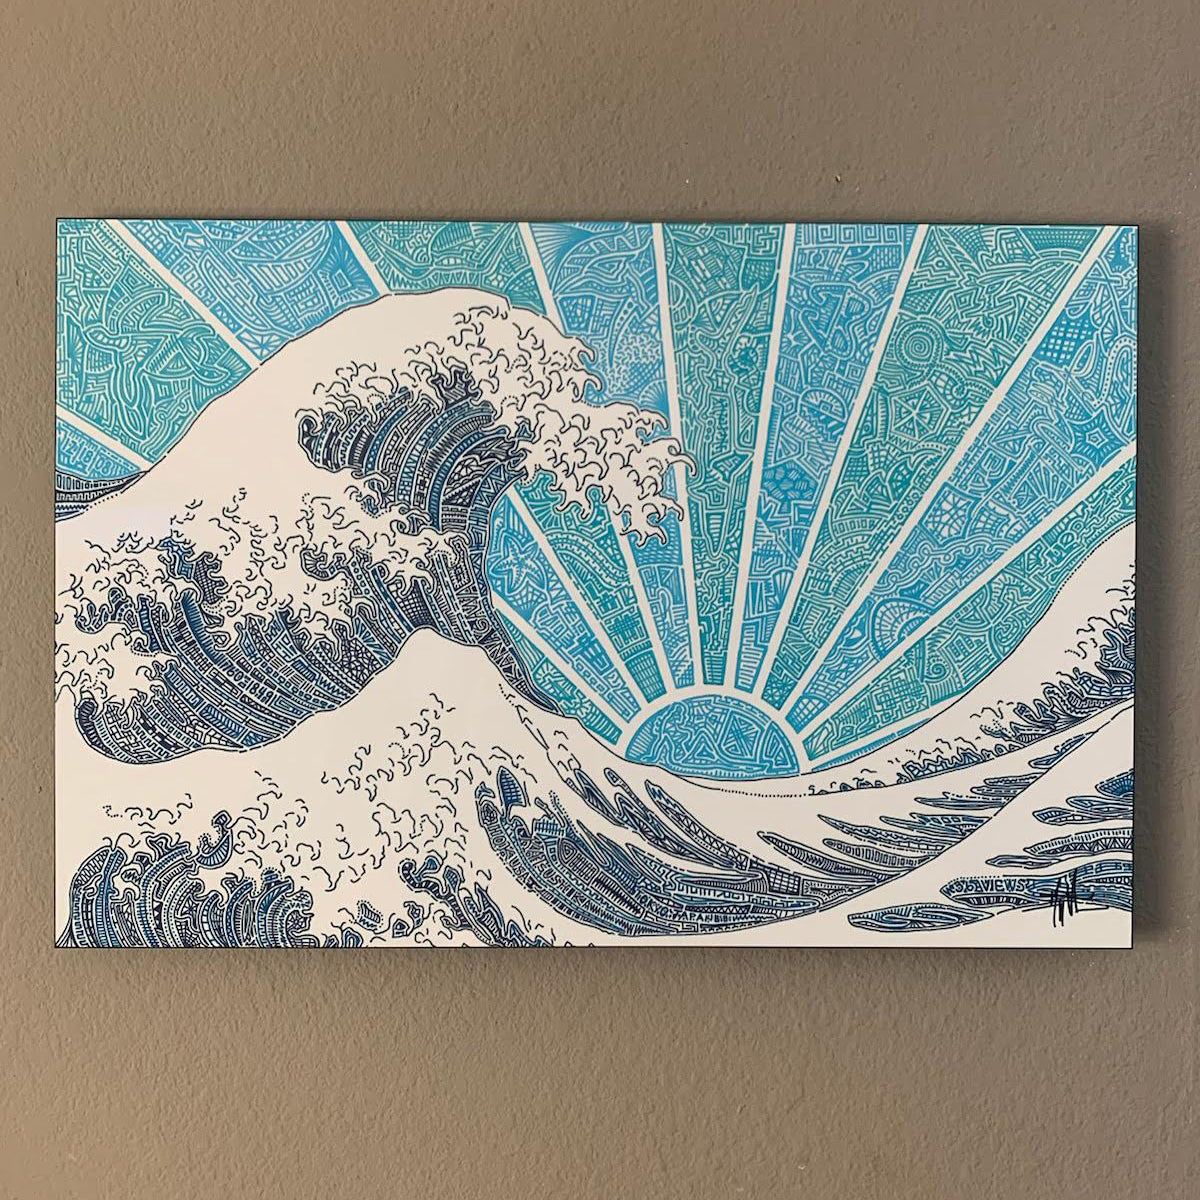 Hokusai - The Great Wave Poster - Blue wave 